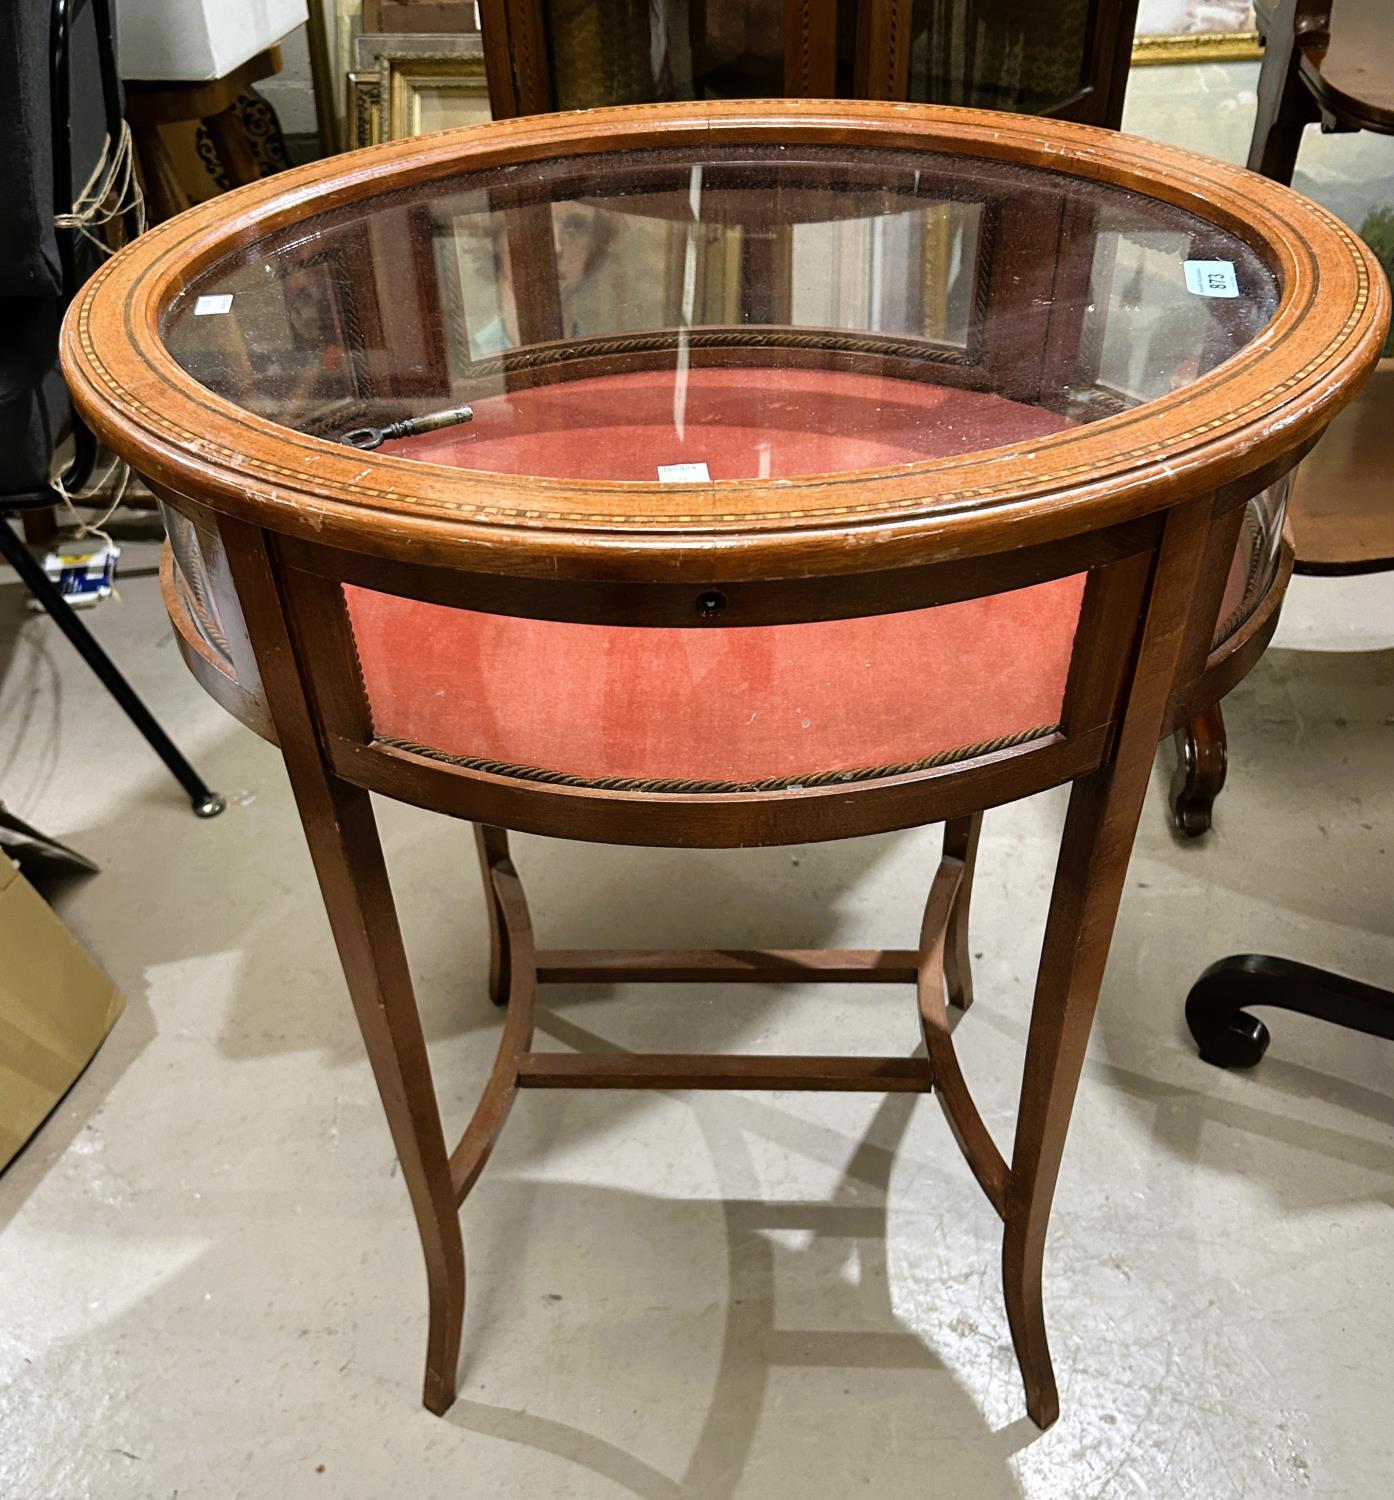 An Edwardian oval bijouterie cabinet in Sheraton style inlaid mahogany, on square tapering legs